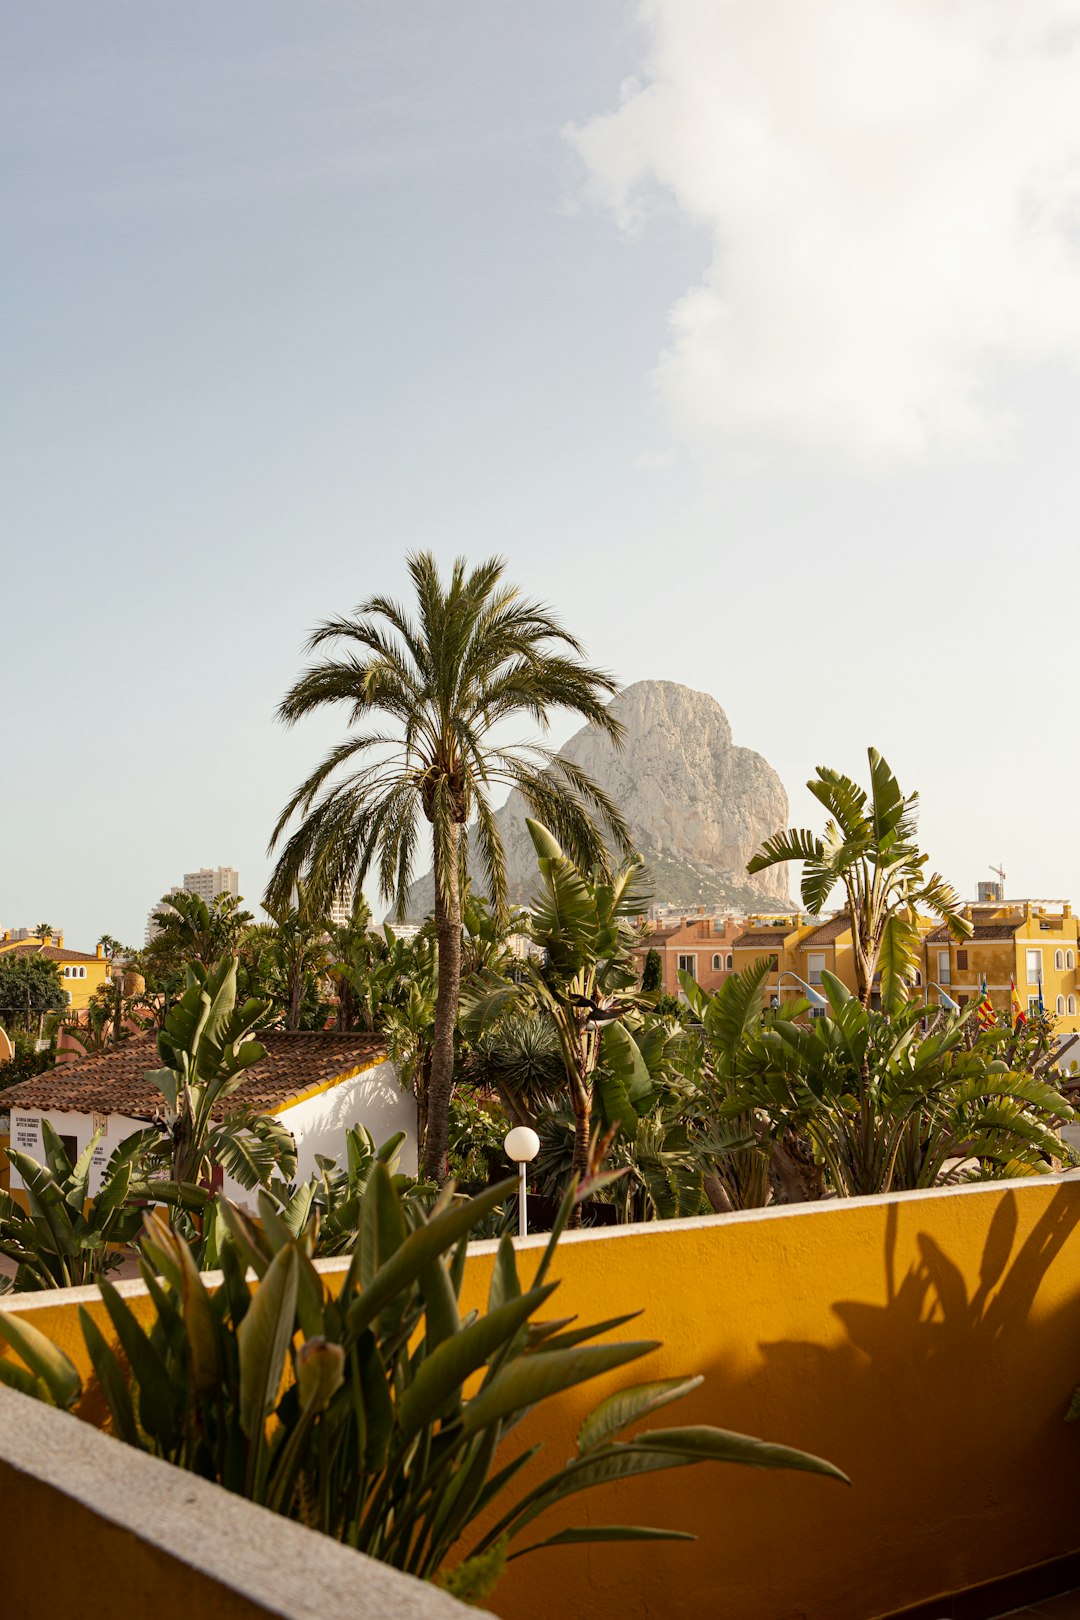 Travel Tips and Stories of Calp in Spain